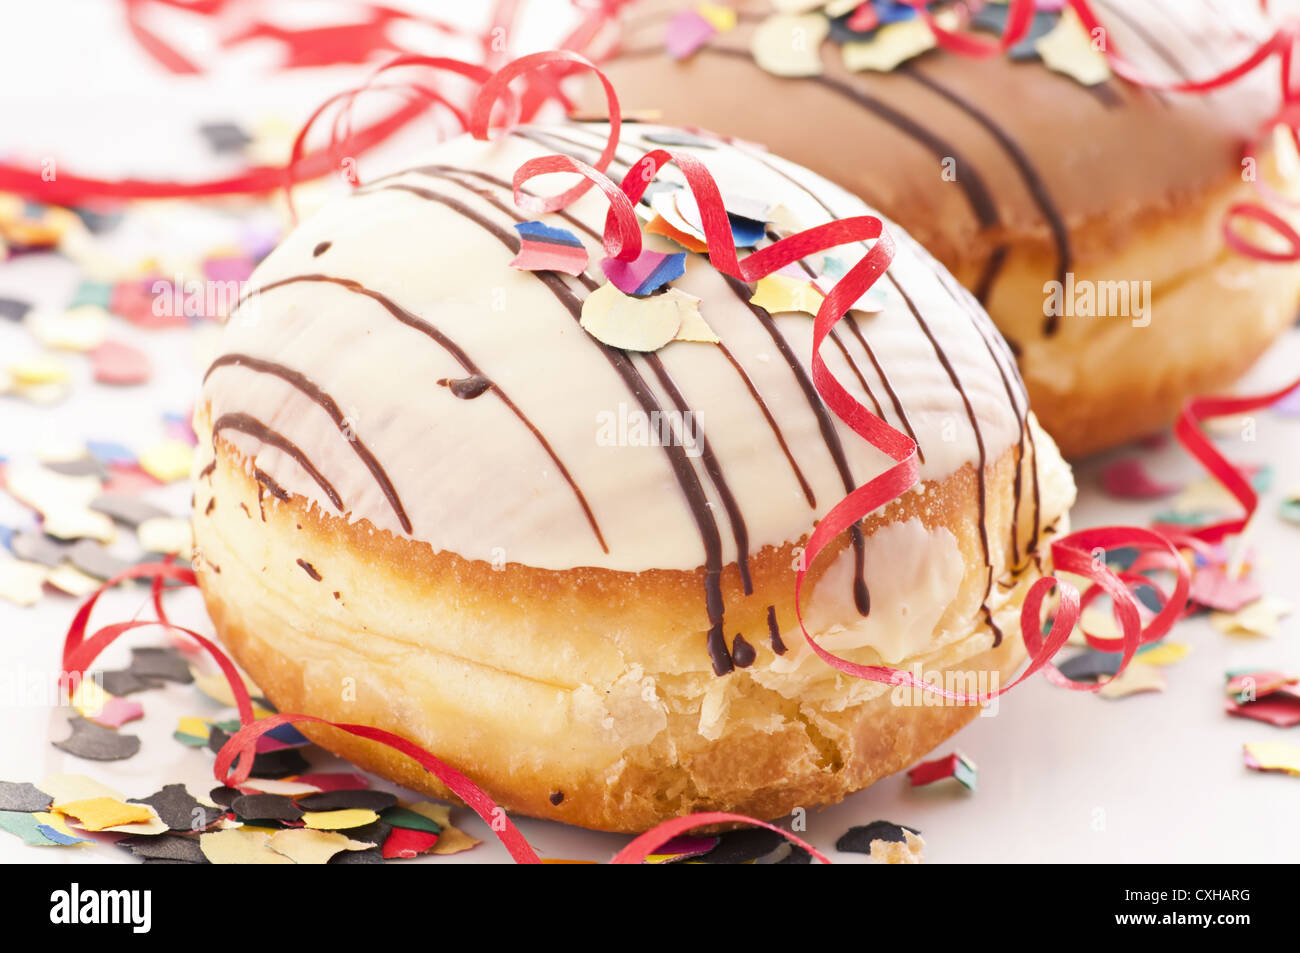 Krapfen with glaze and decoration Stock Photo